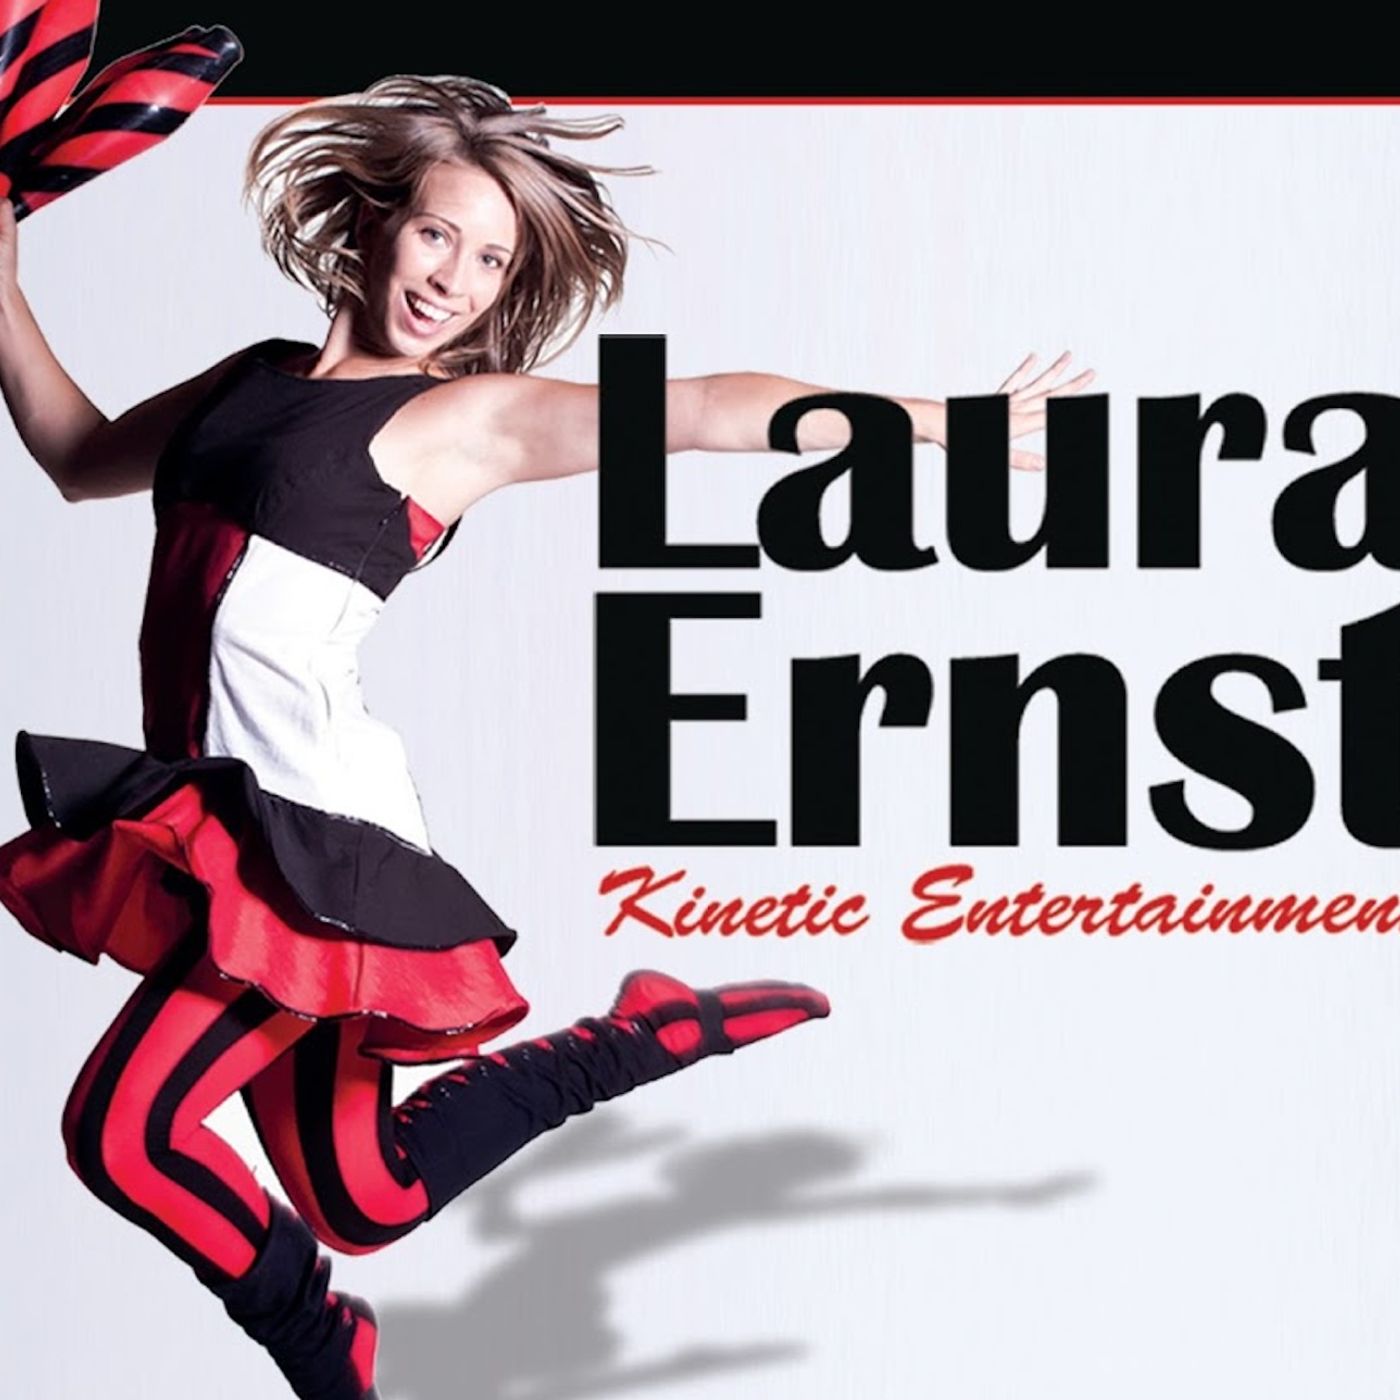 CoolKay interviews Laura Ernst - Kinetic Entertainment